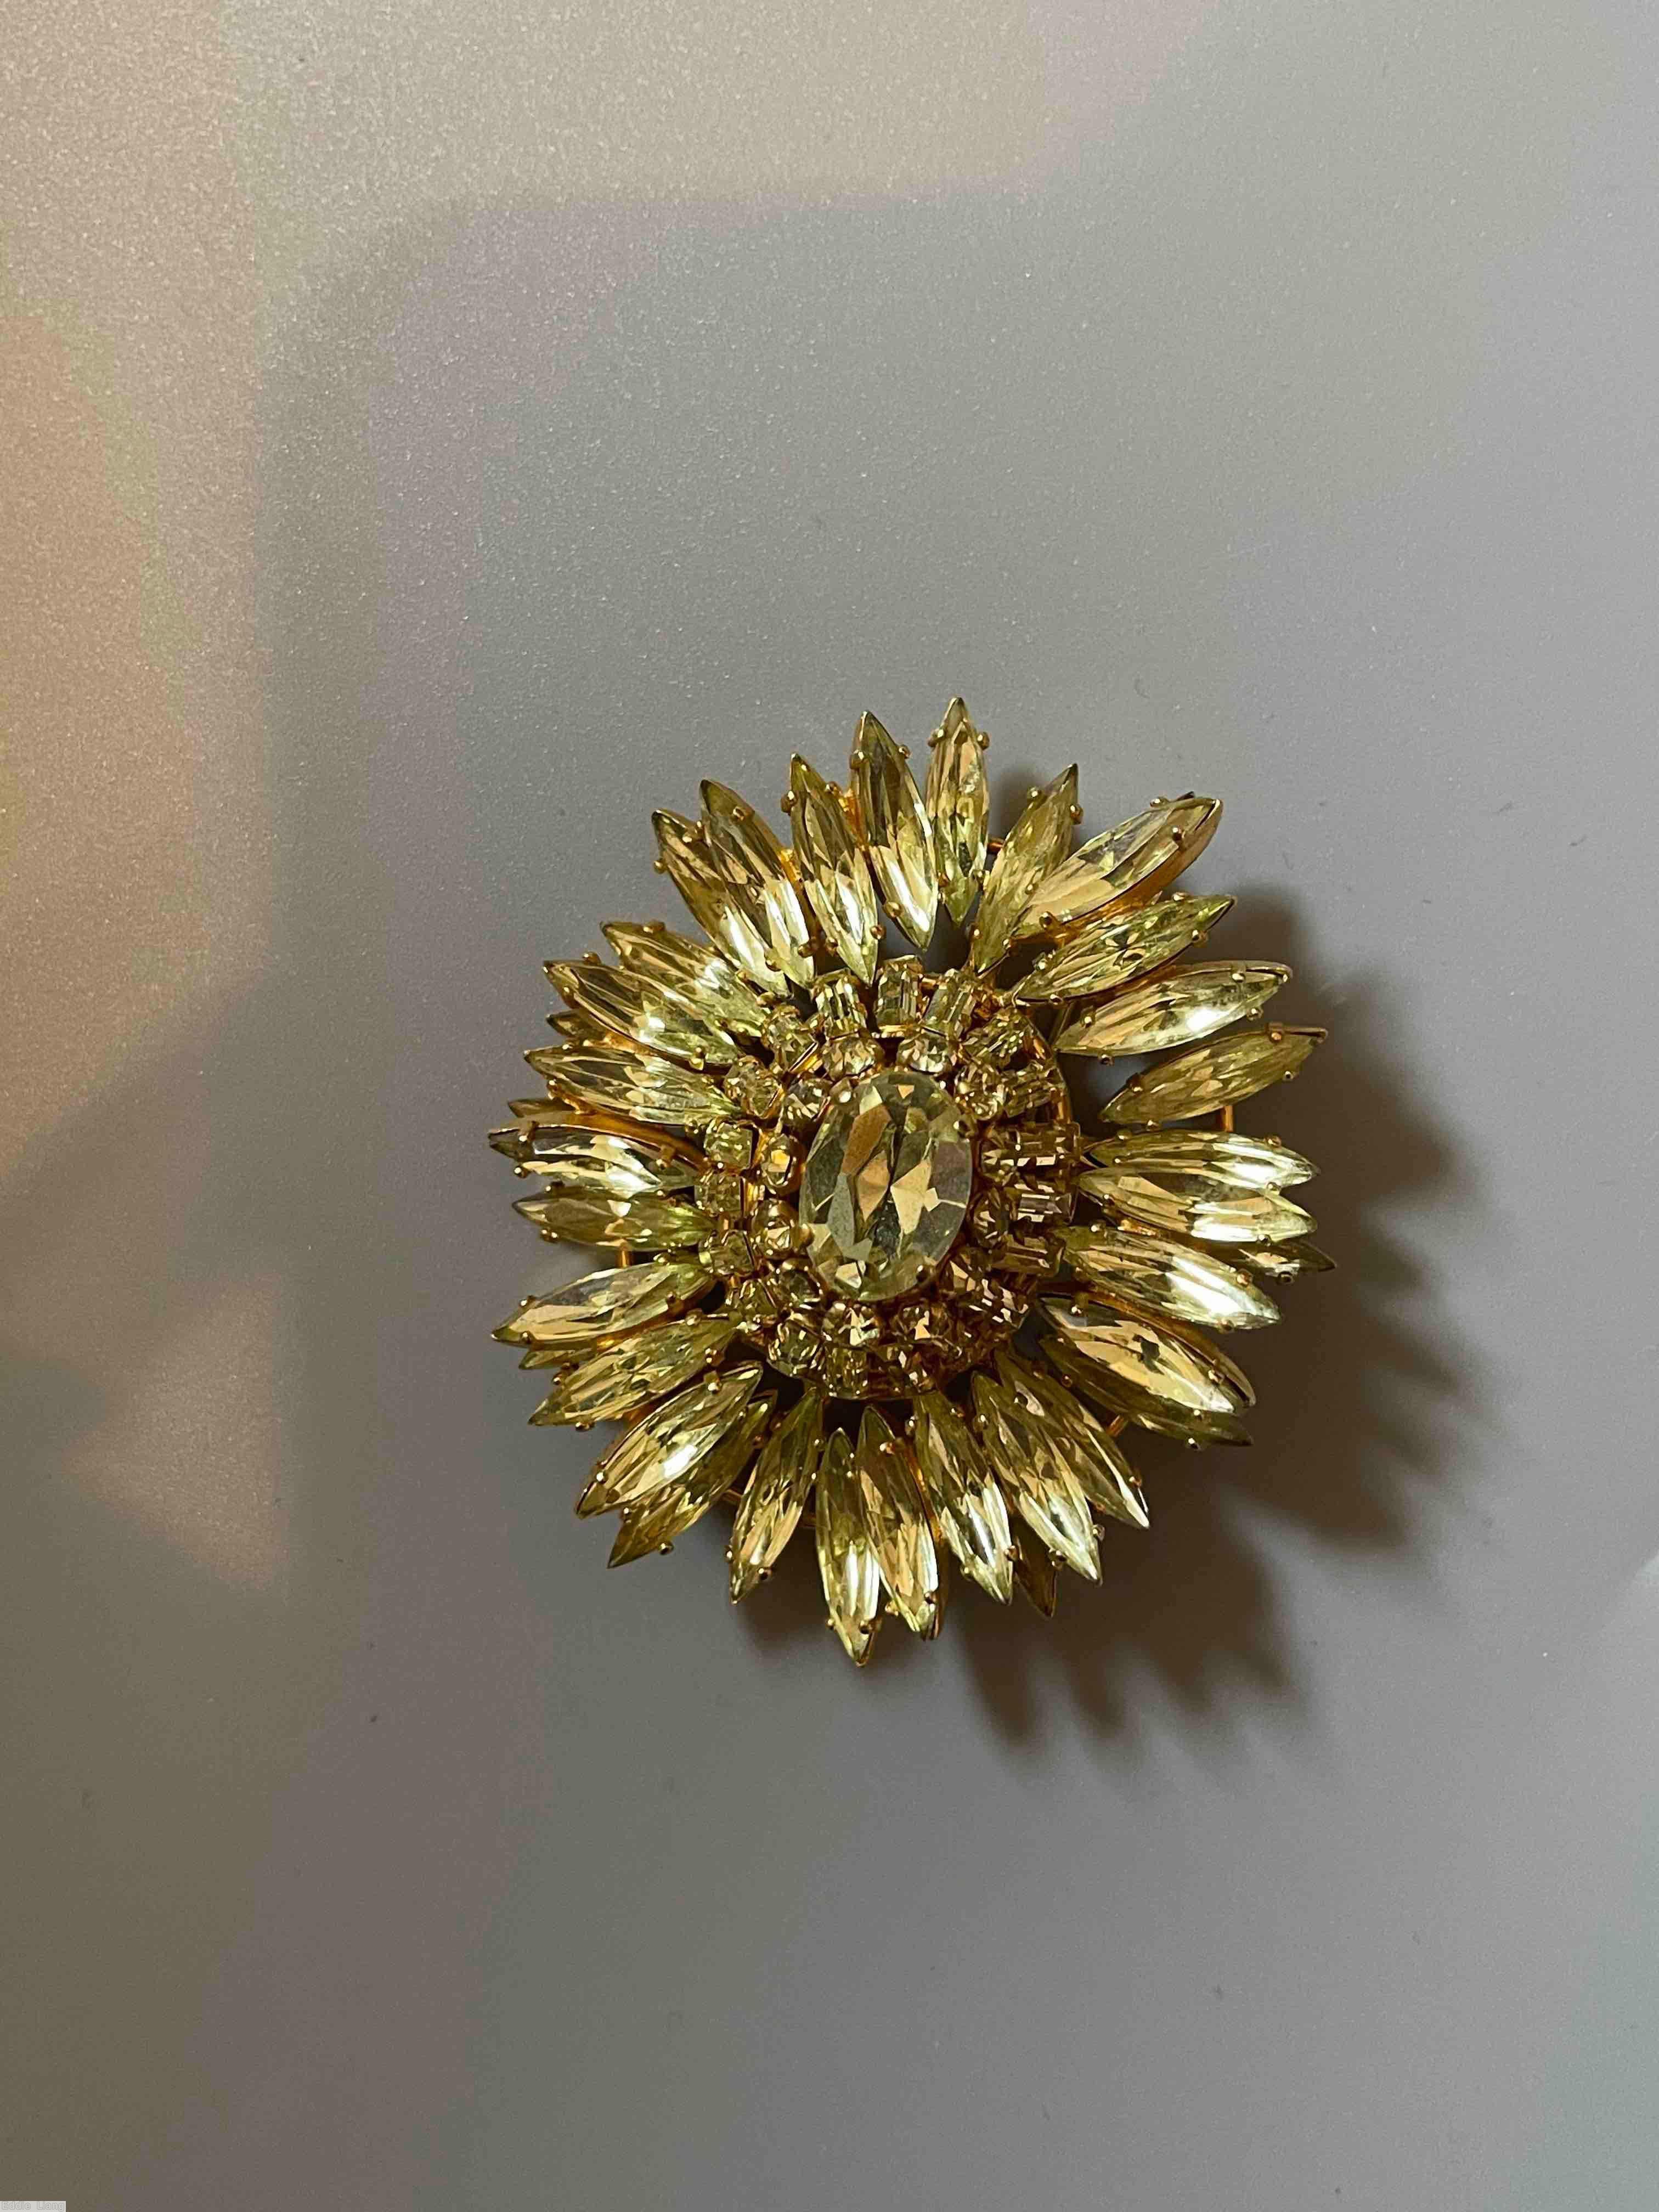 Schreiner navette ruffle pin hook eye domed oval center 2 rounds surrounding stone clear champgne goldtone jewelry